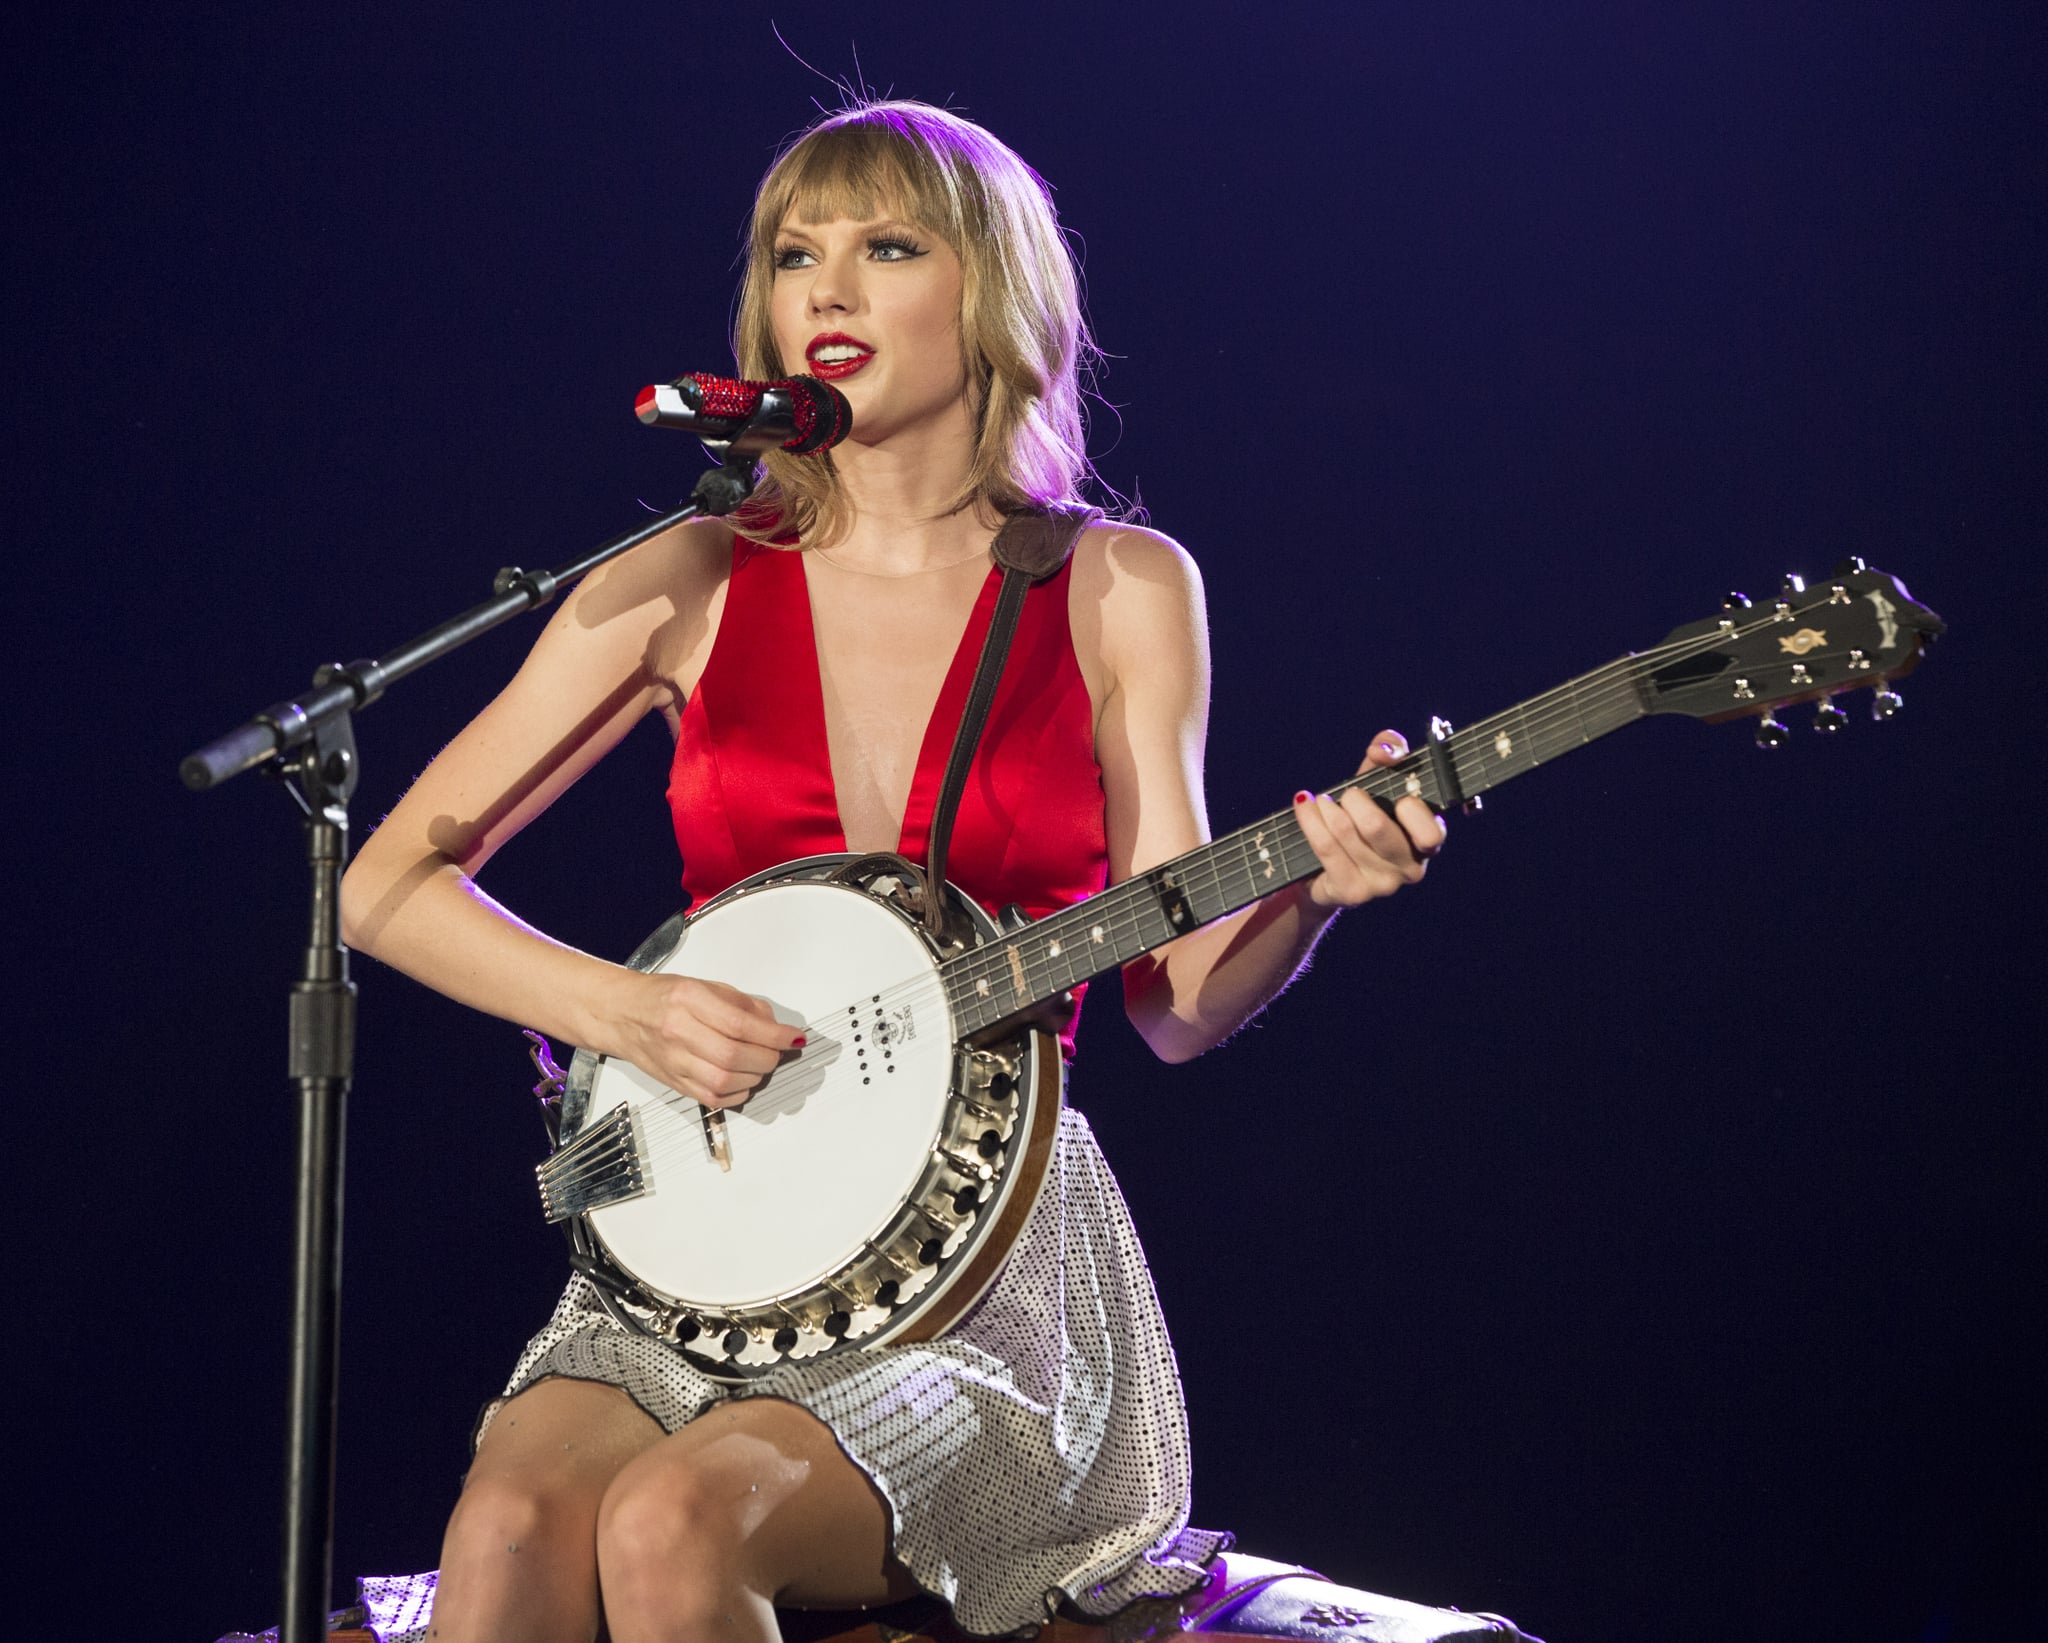 ARLINGTON, TX - MAY 25:  Taylor Swift plays for a sold-out crowd of more than 53,000 fans on the second of 13 North American stadium dates on The RED Tour at Cowboys Stadium on May 25, 2013 in Arlington, Texas.  (Photo by Christopher Polk/TAS/Getty Images for TAS)